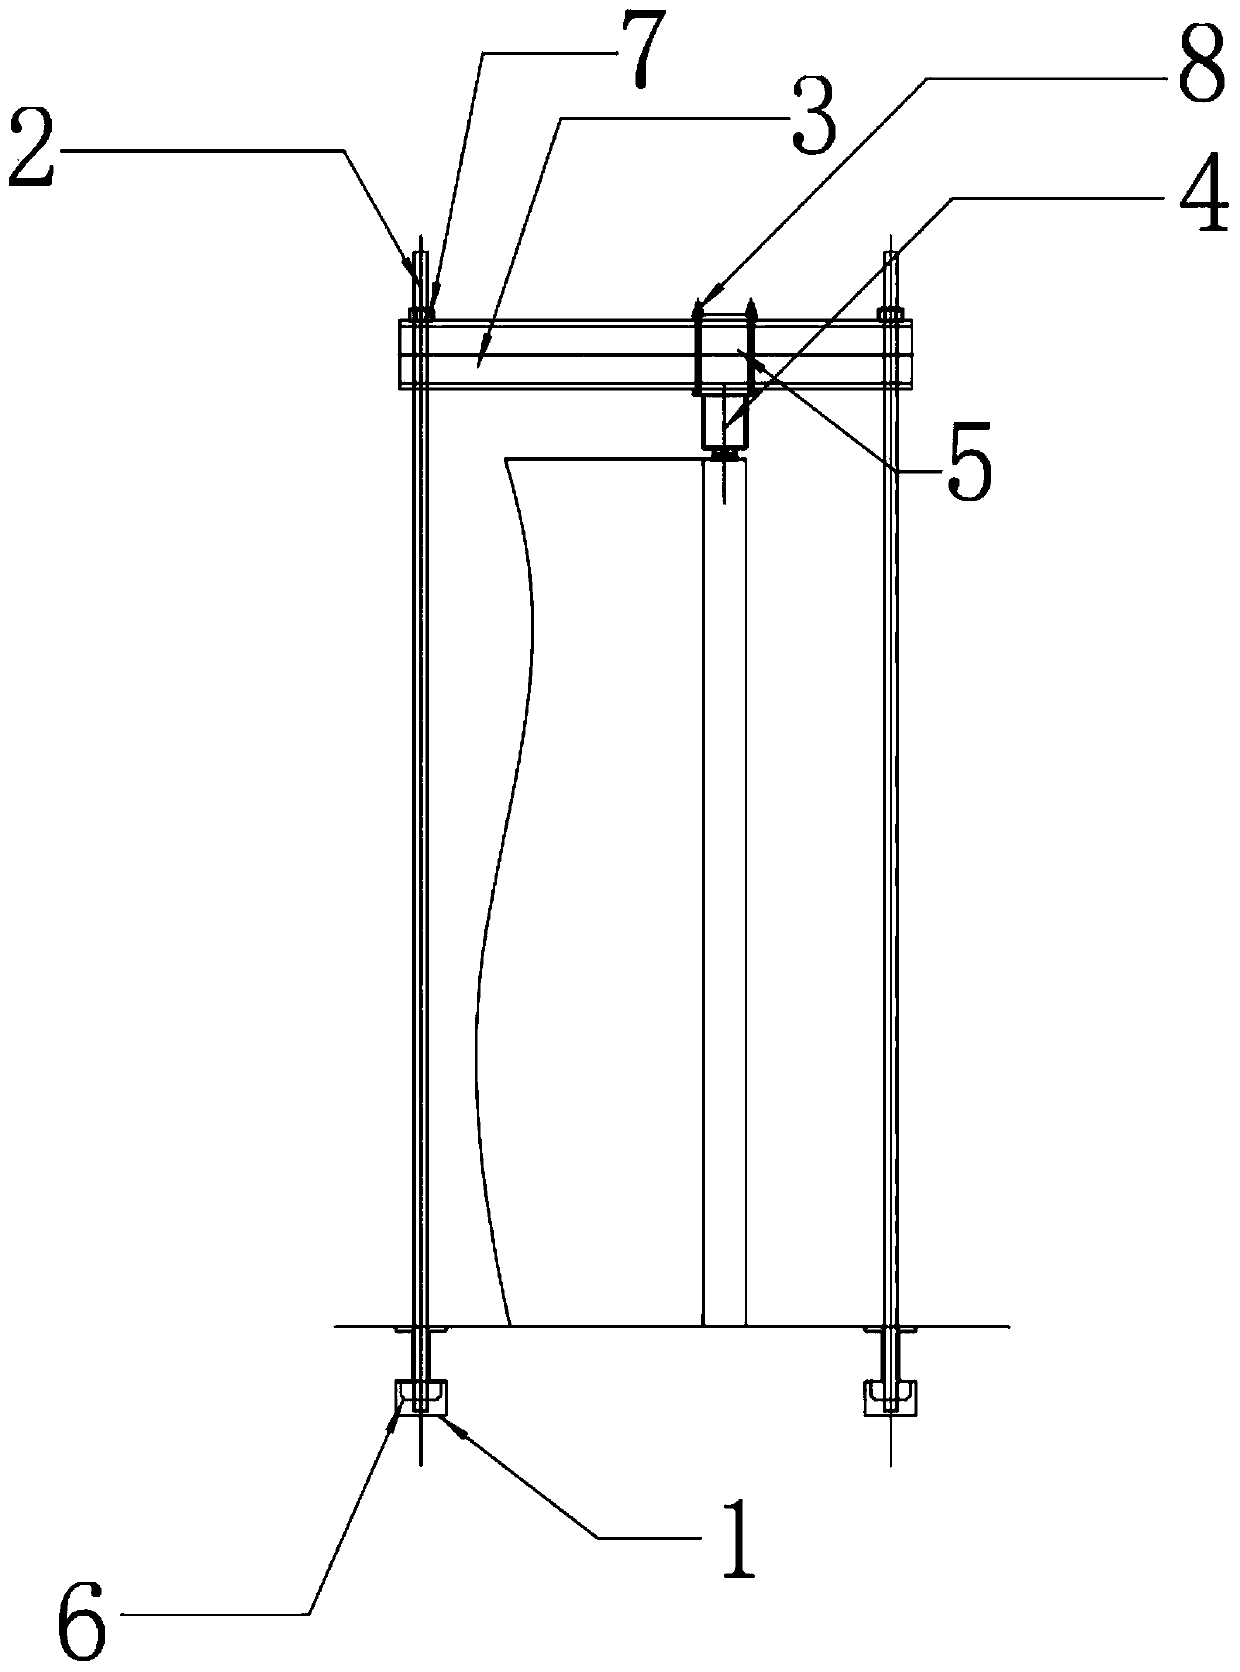 Vertical loading device for duct pieces of different sizes in counter-force well and test method